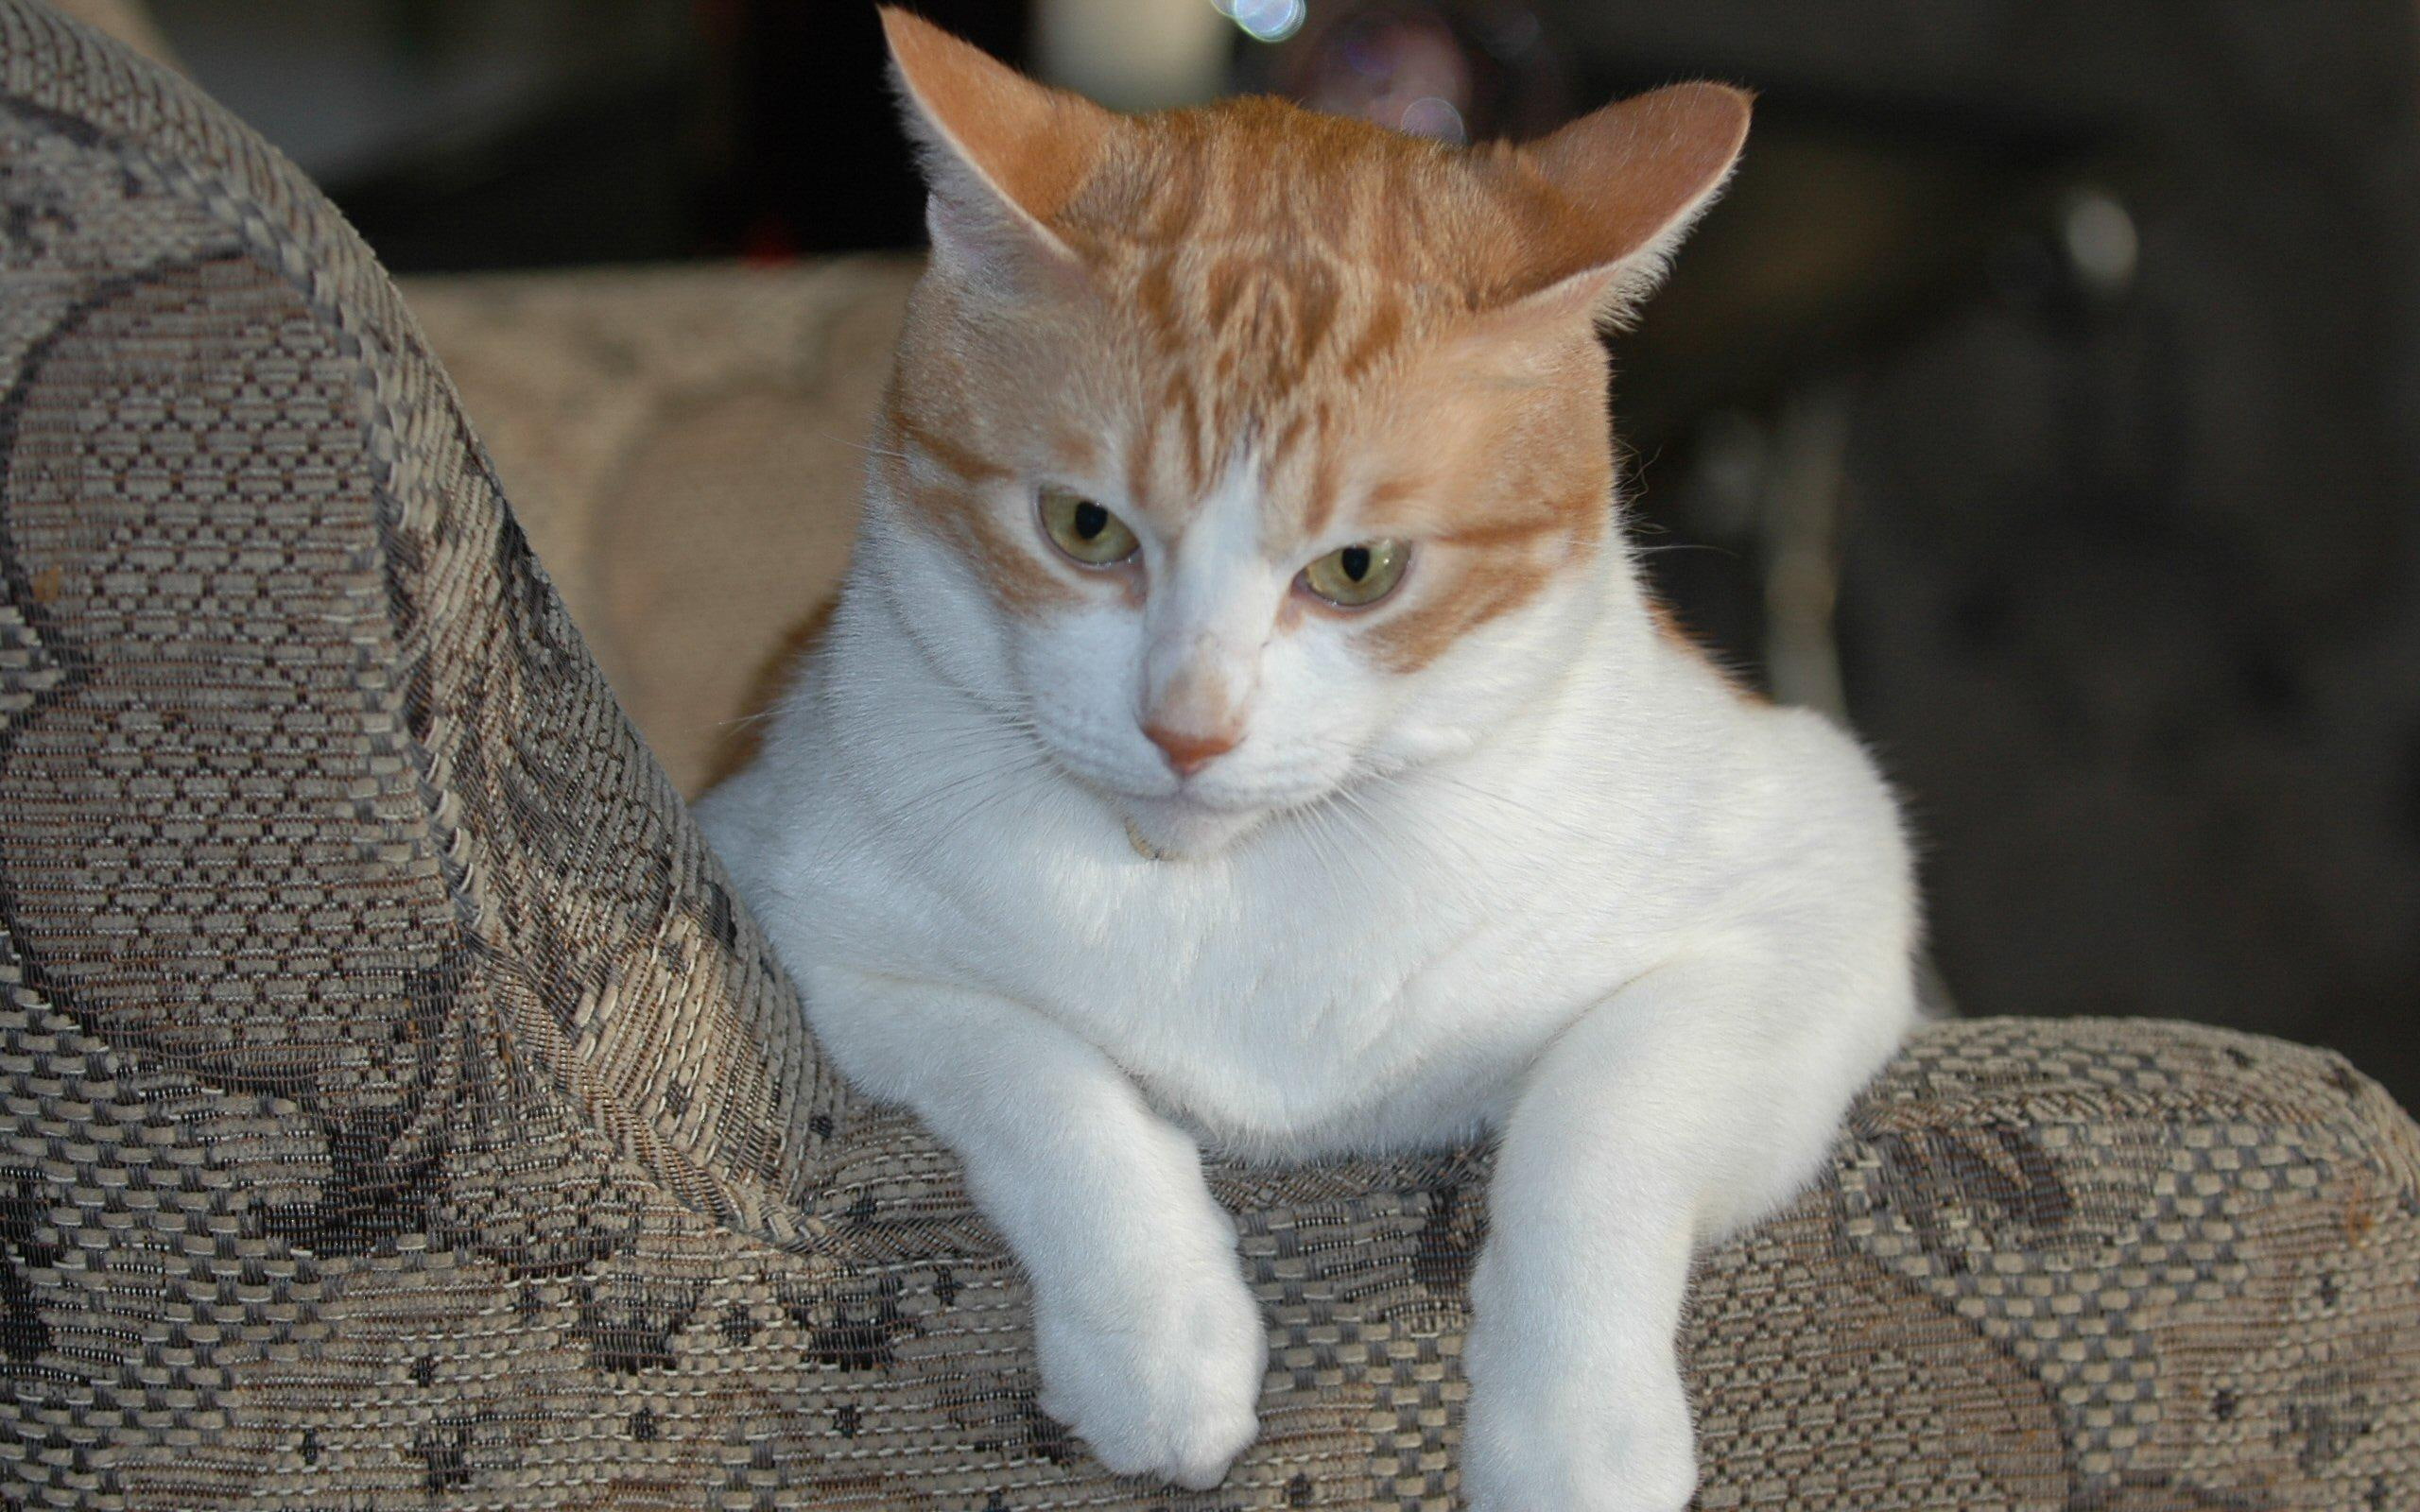 Magnificent Golden Creature, Jose Cuervo - Relaxing In Favorite Chair, white and orange tabby cat